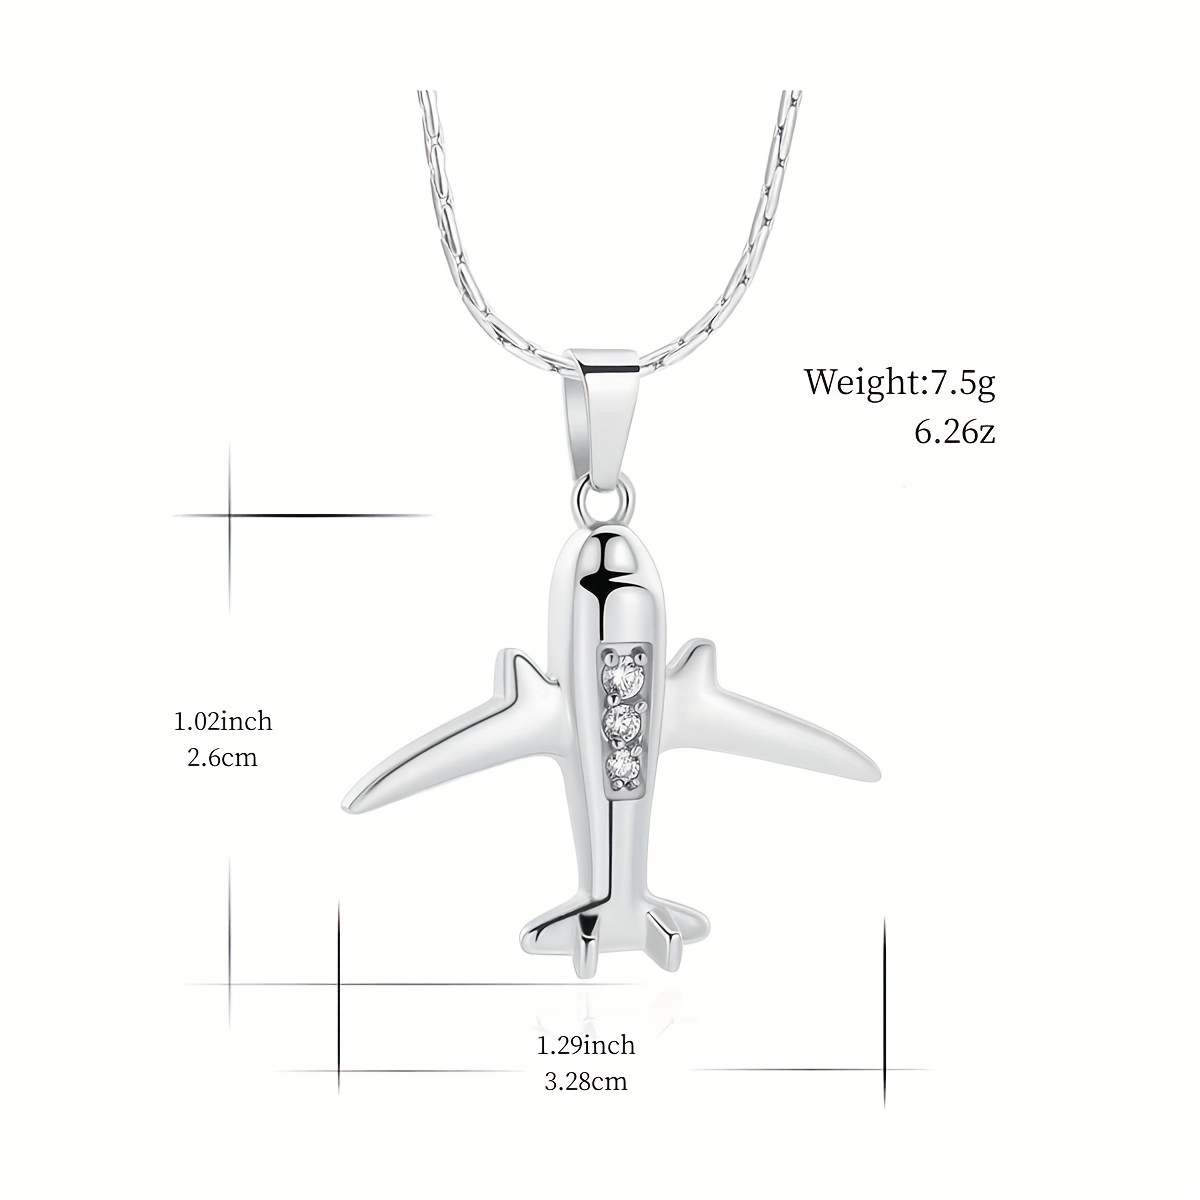 Sterling Silver Plane Necklace With White Crystal Details 